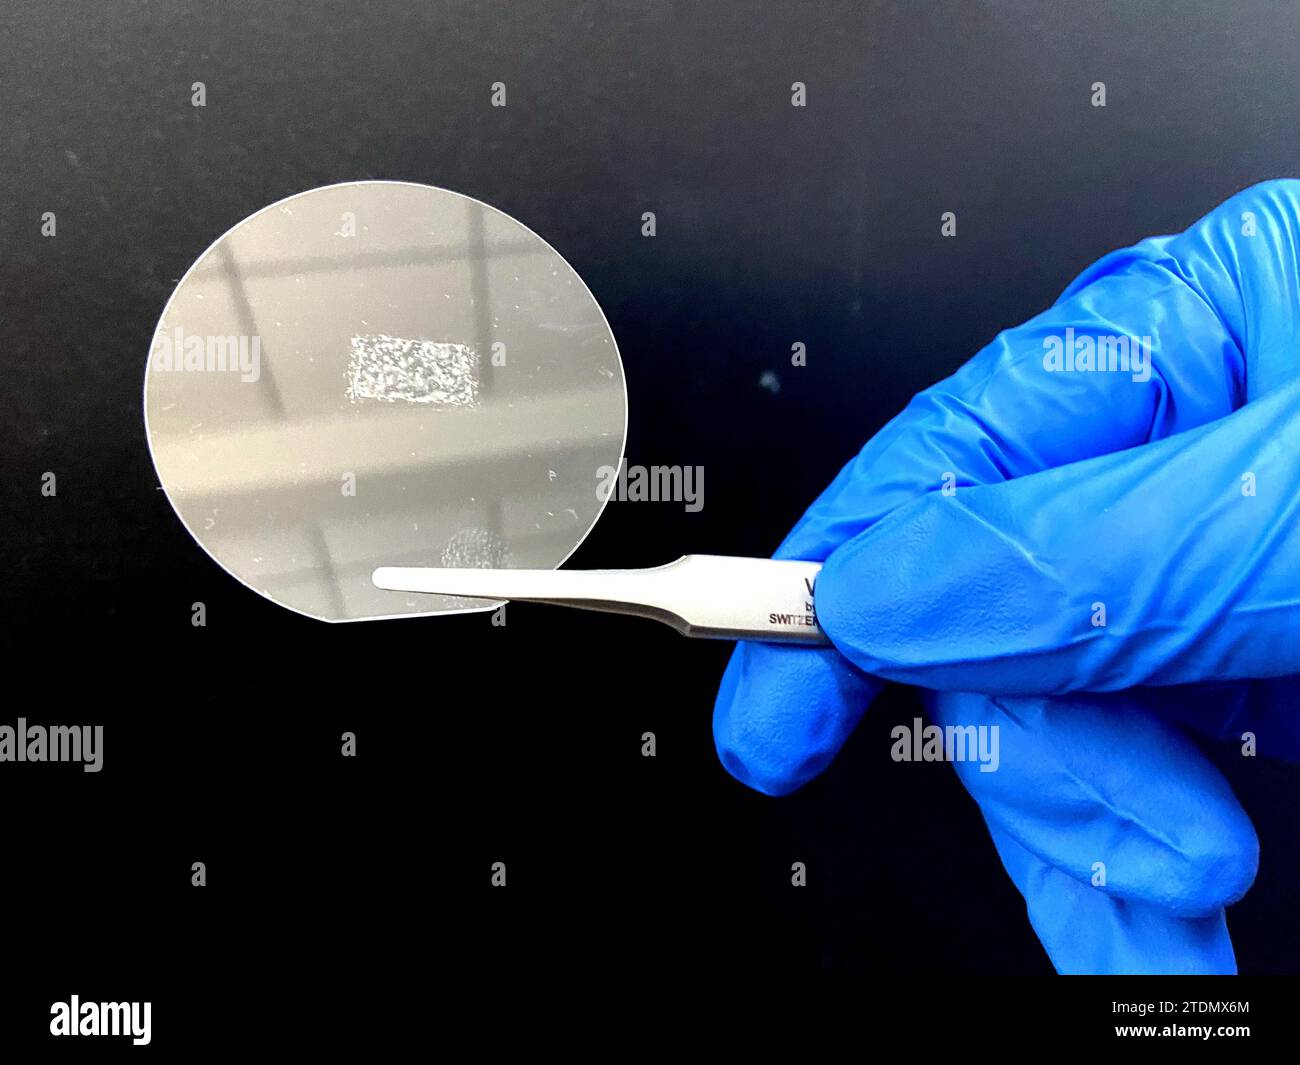 (231219) -- BEIJING, Dec. 19, 2023 (Xinhua) -- This photo taken on Dec. 15, 2023 shows a Twist Boron Nitride (TBN) crystal placed on a piece of fused silica in Peking University, Beijing, capital of China. A team of Chinese researchers used a novel theory to invent a new type of ultrathin optical crystal with high energy efficiency, laying the foundation for next-generation laser technology. The research findings were recently published in the journal Physical Review Letters. TO GO WITH 'China Focus: Chinese scientists invent ultrathin optical crystal for next-generation laser tech' (Xinh Stock Photo